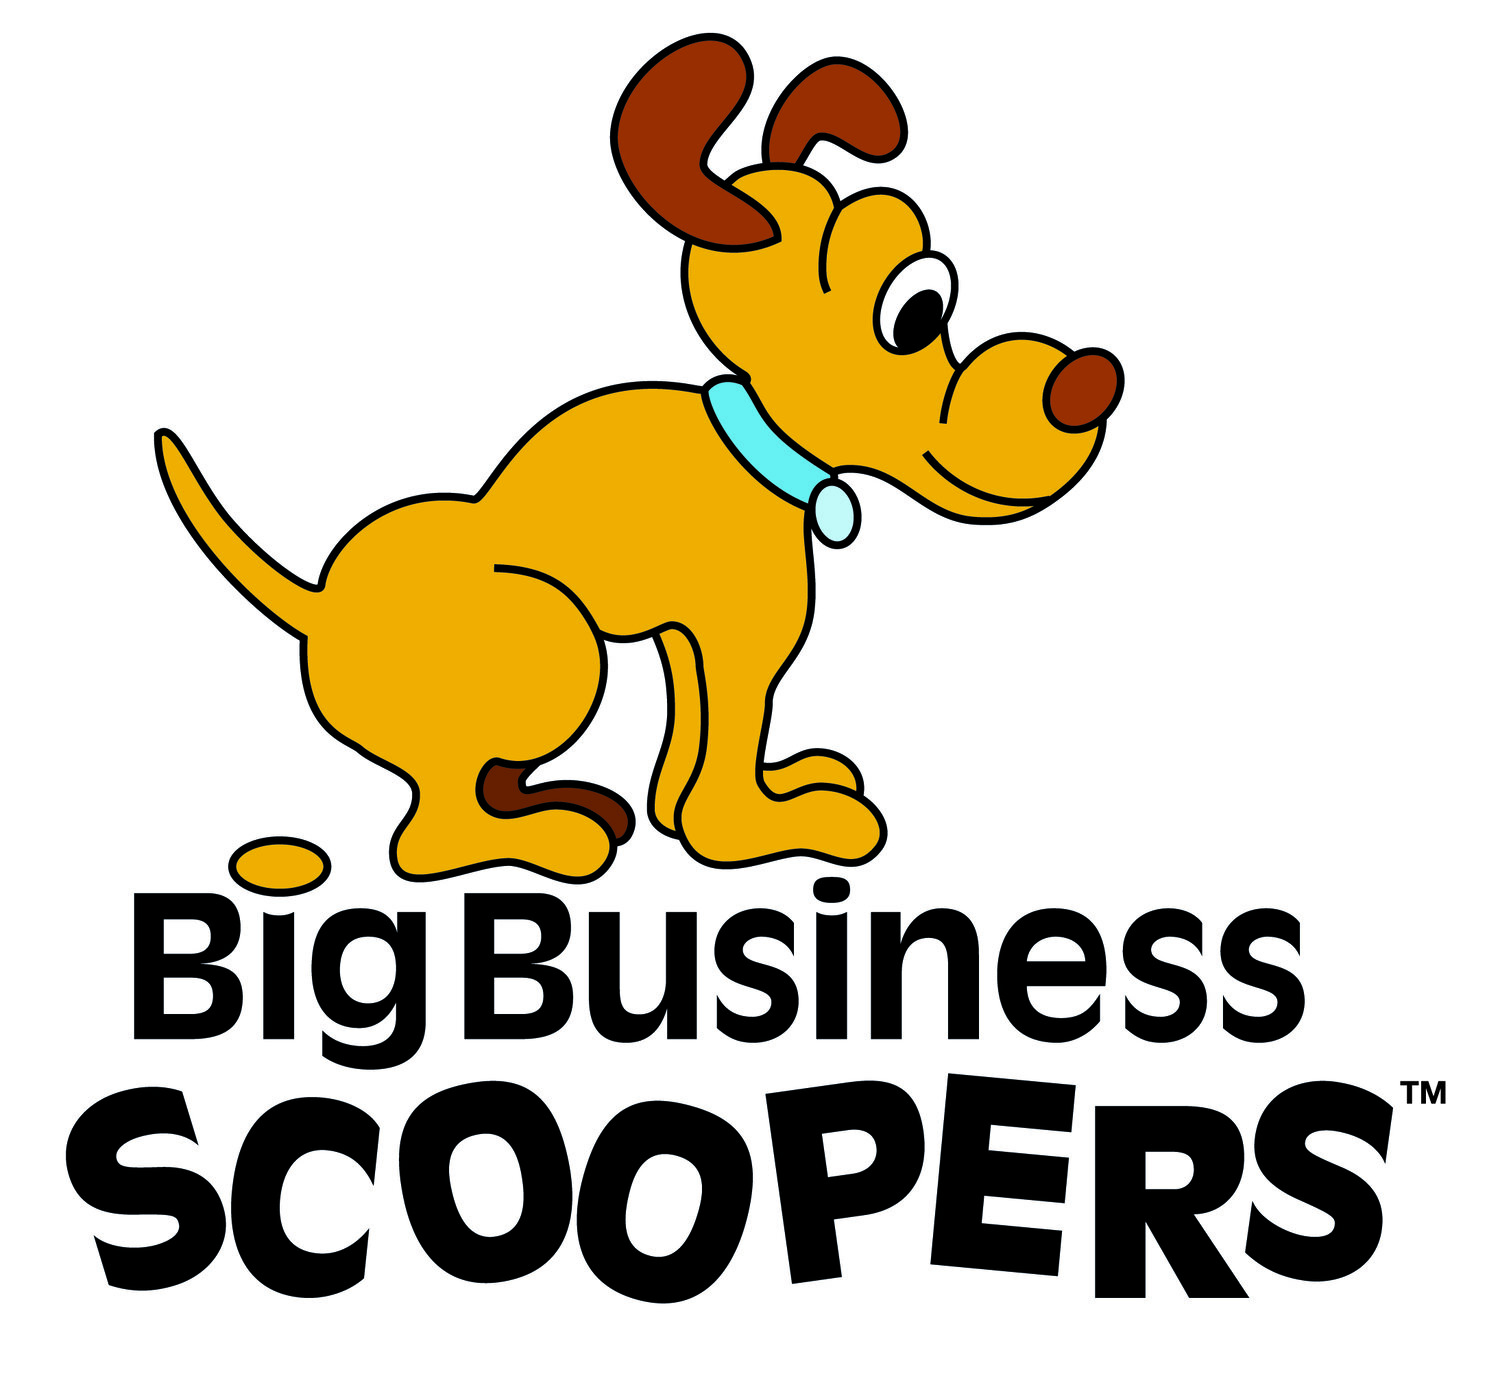 Big Business Scoopers | New Jersey Pet Waste Removal Service